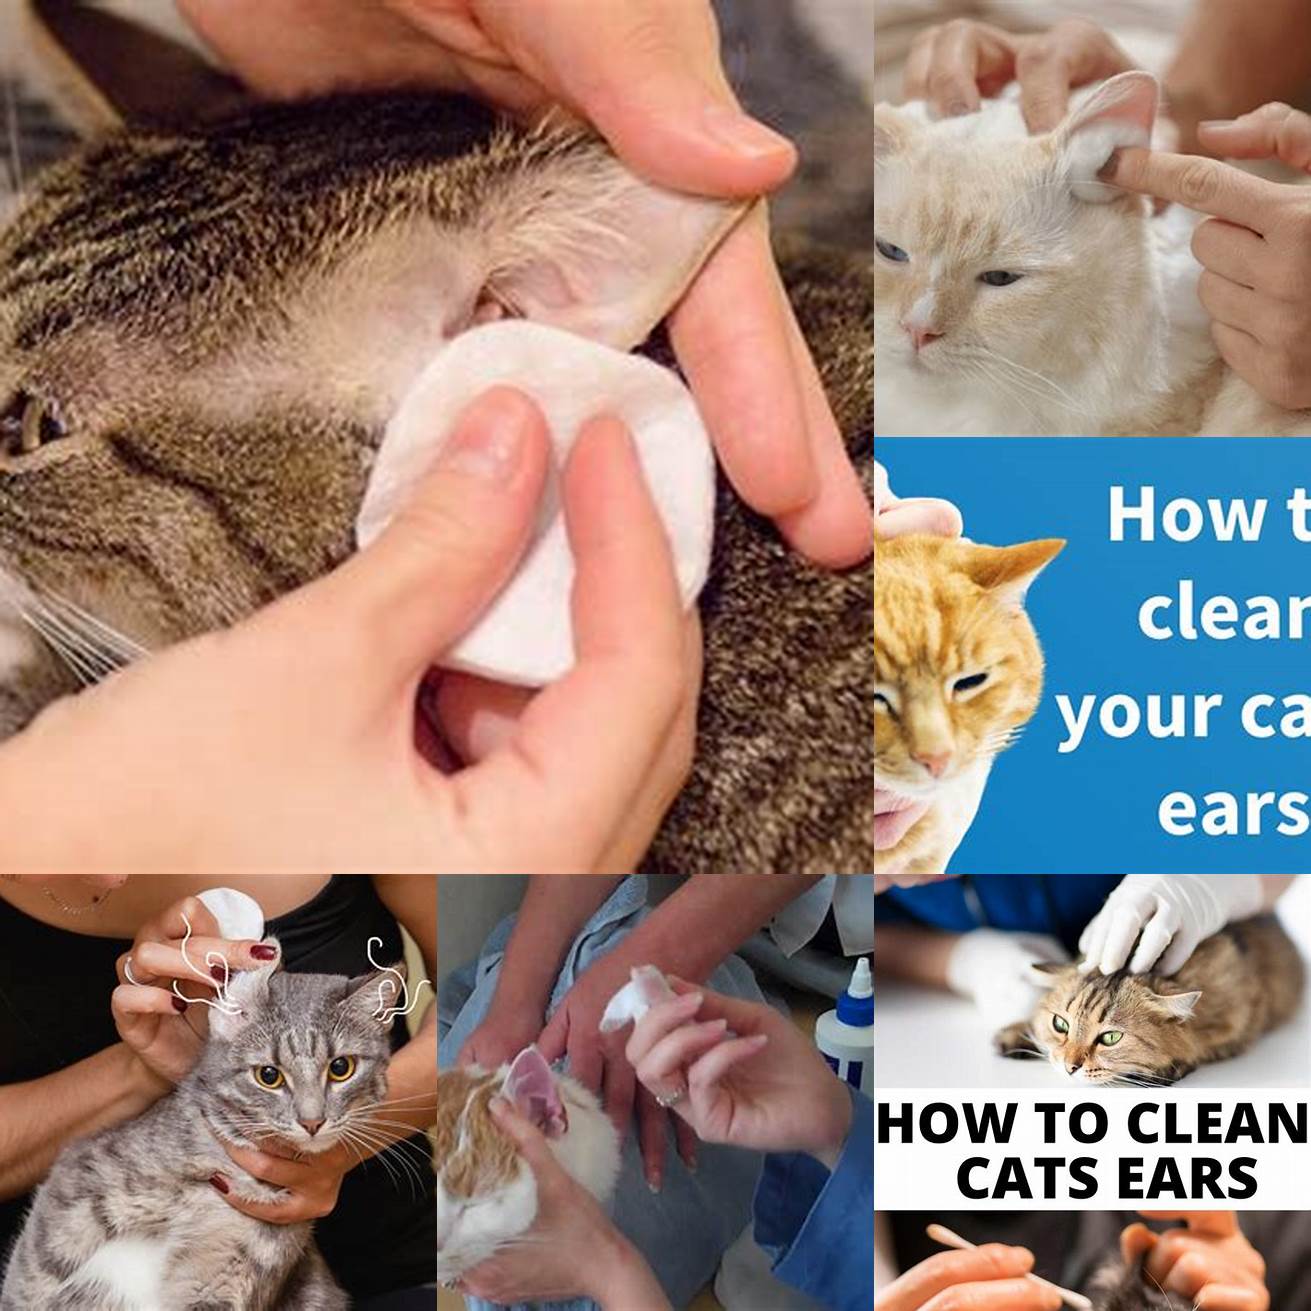 Keep your cats ears clean and dry